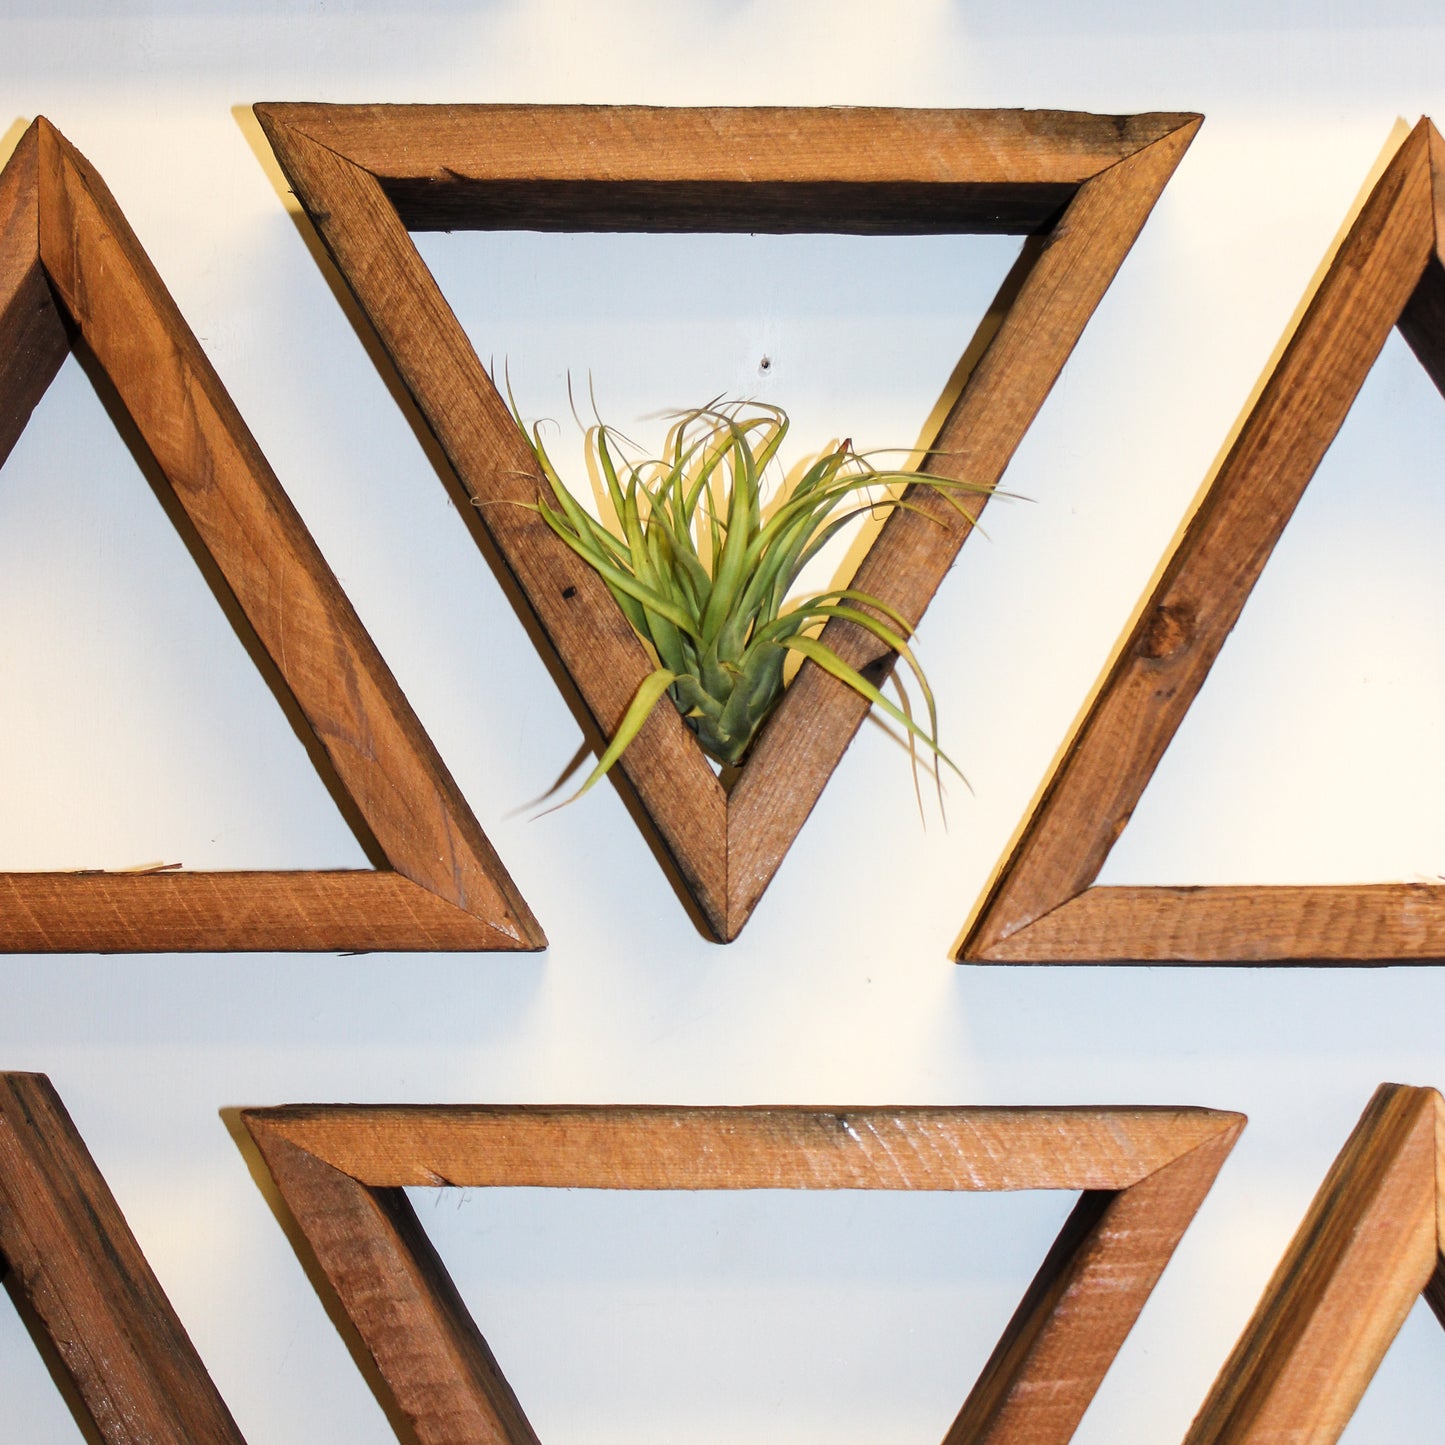 Reclaimed Wood Triangle Wall Shelf with air plant